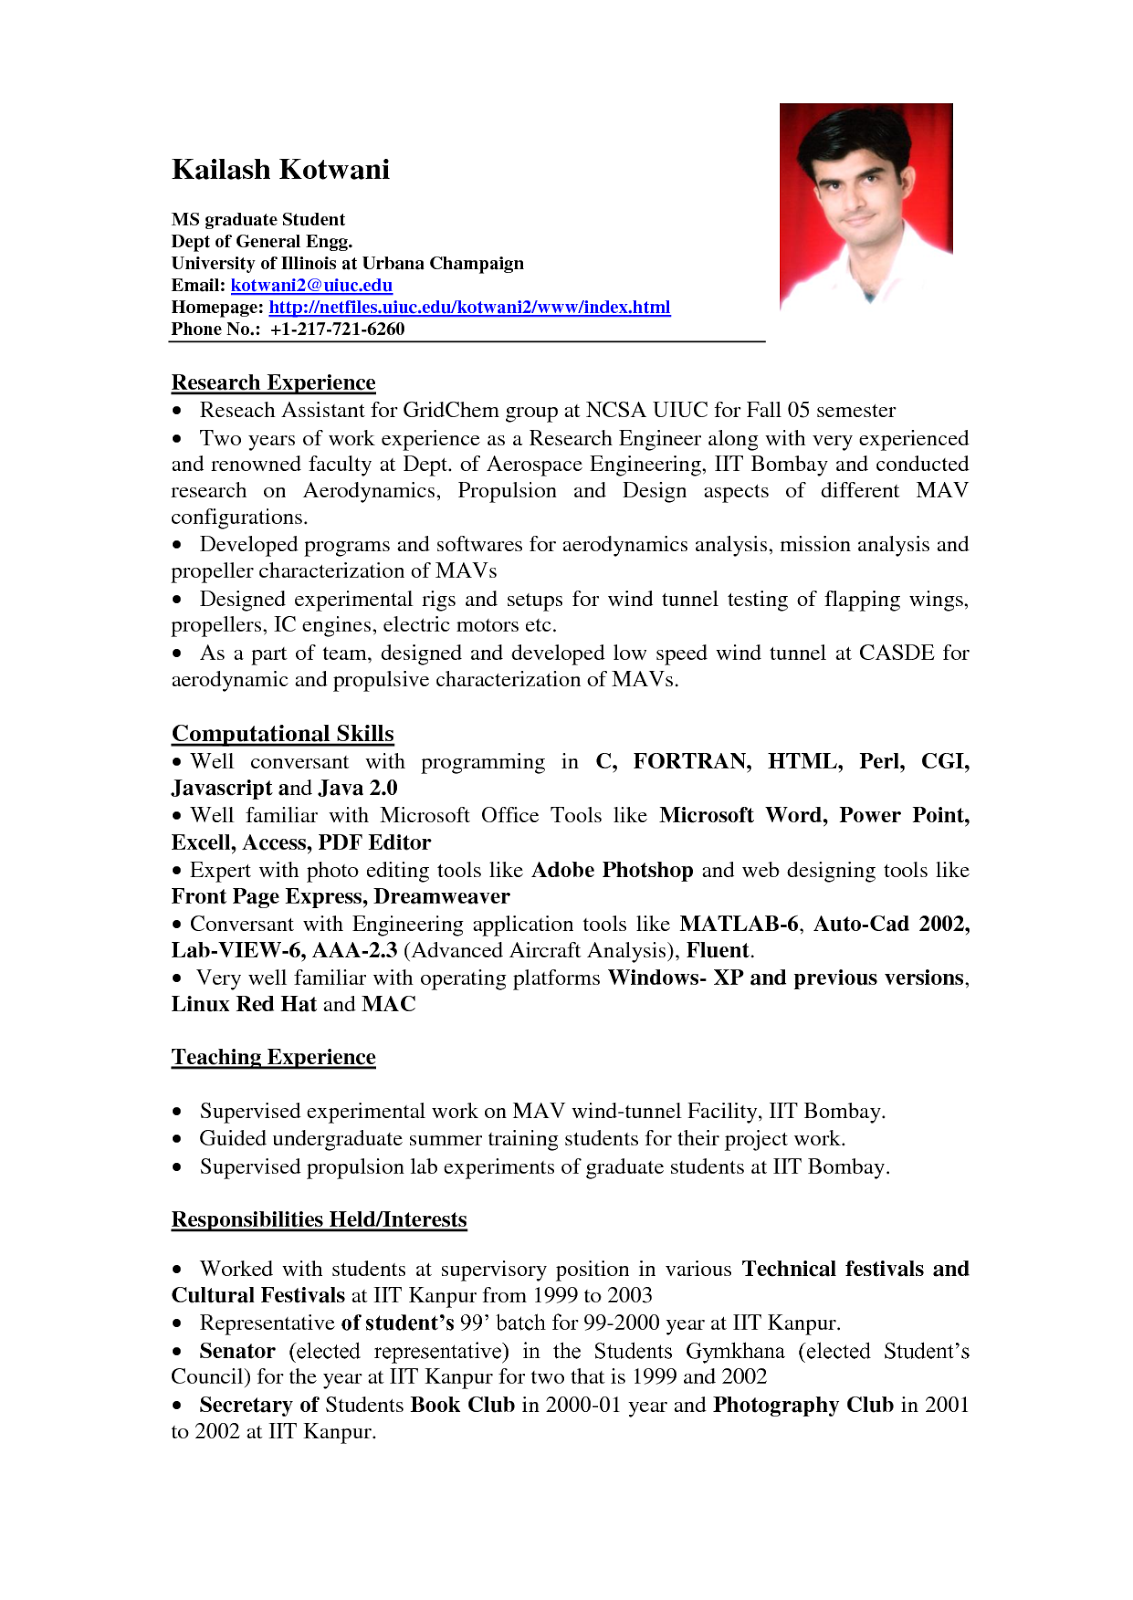 Resume format for graduate students